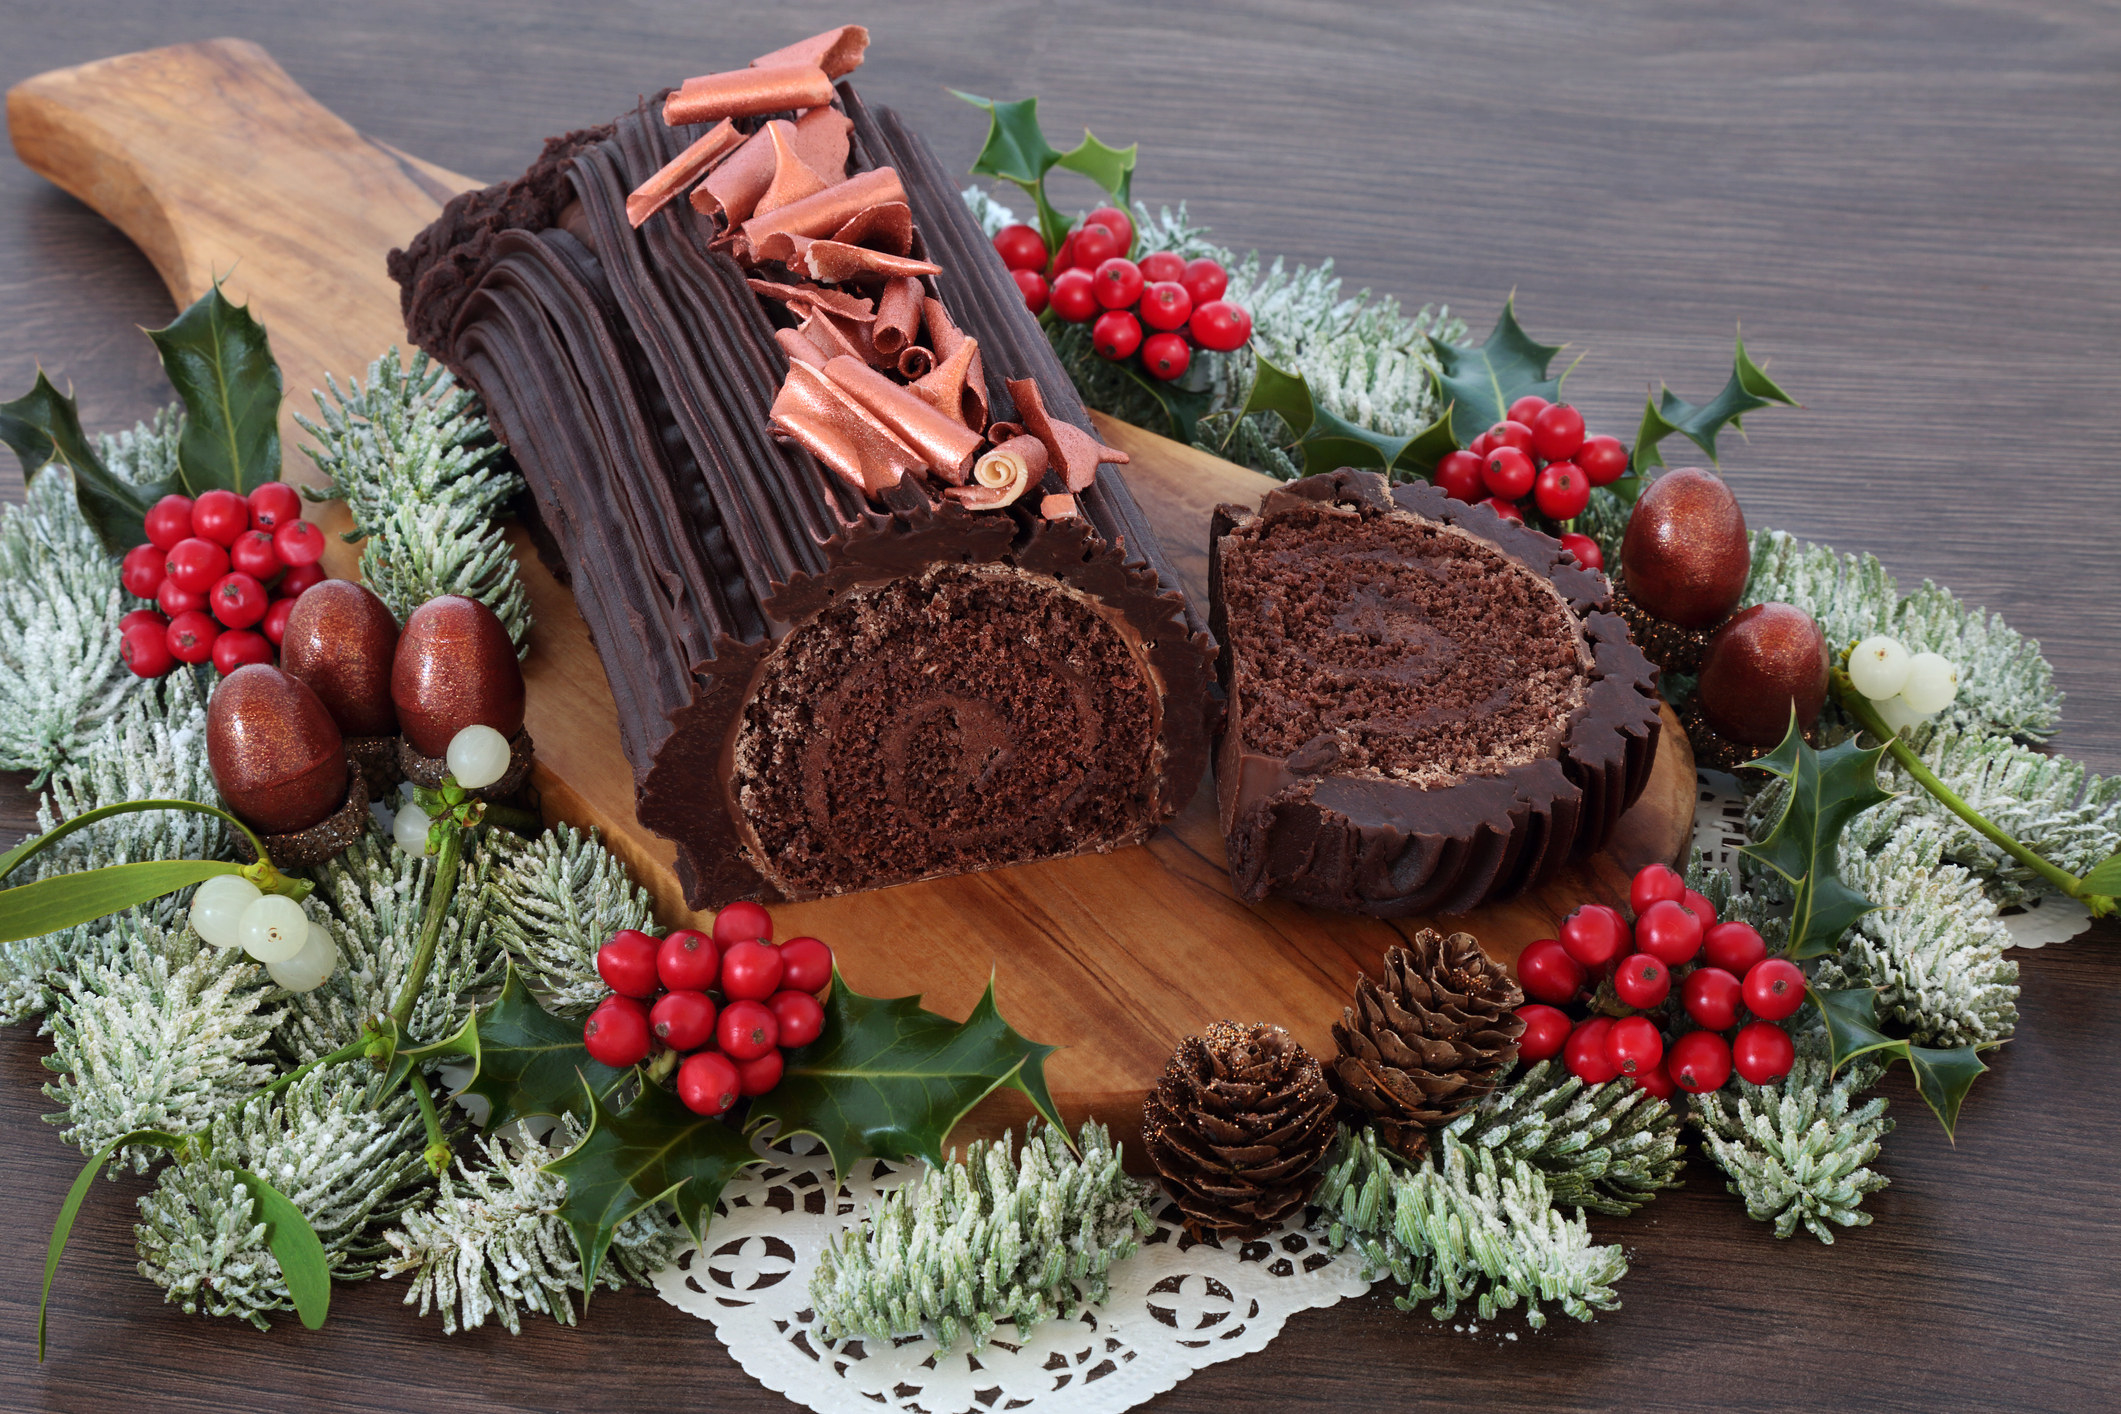 A chocolate yule log sitting on a board with a wreath around it.